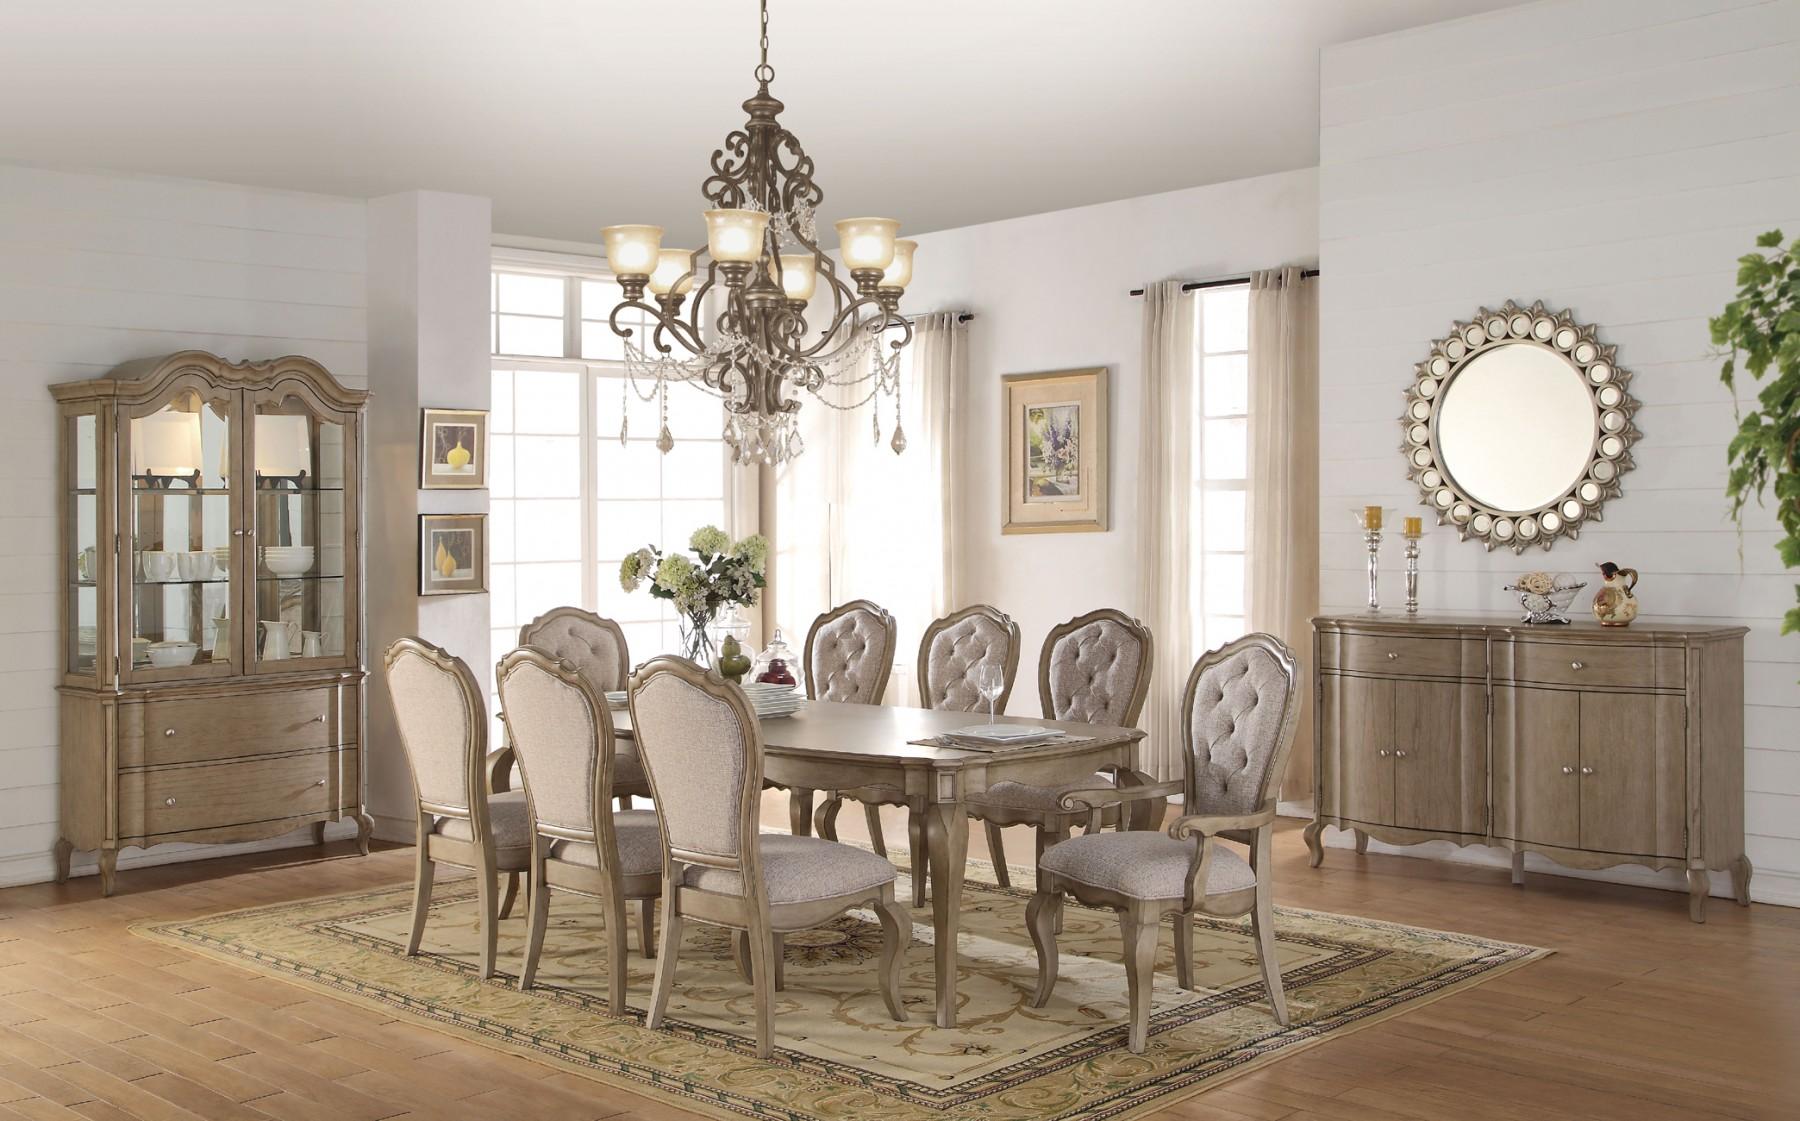 Classic, Traditional Dining Table Set Chelmsford 66050 66050 Chelmsford-Set-10 in Taupe Fabric